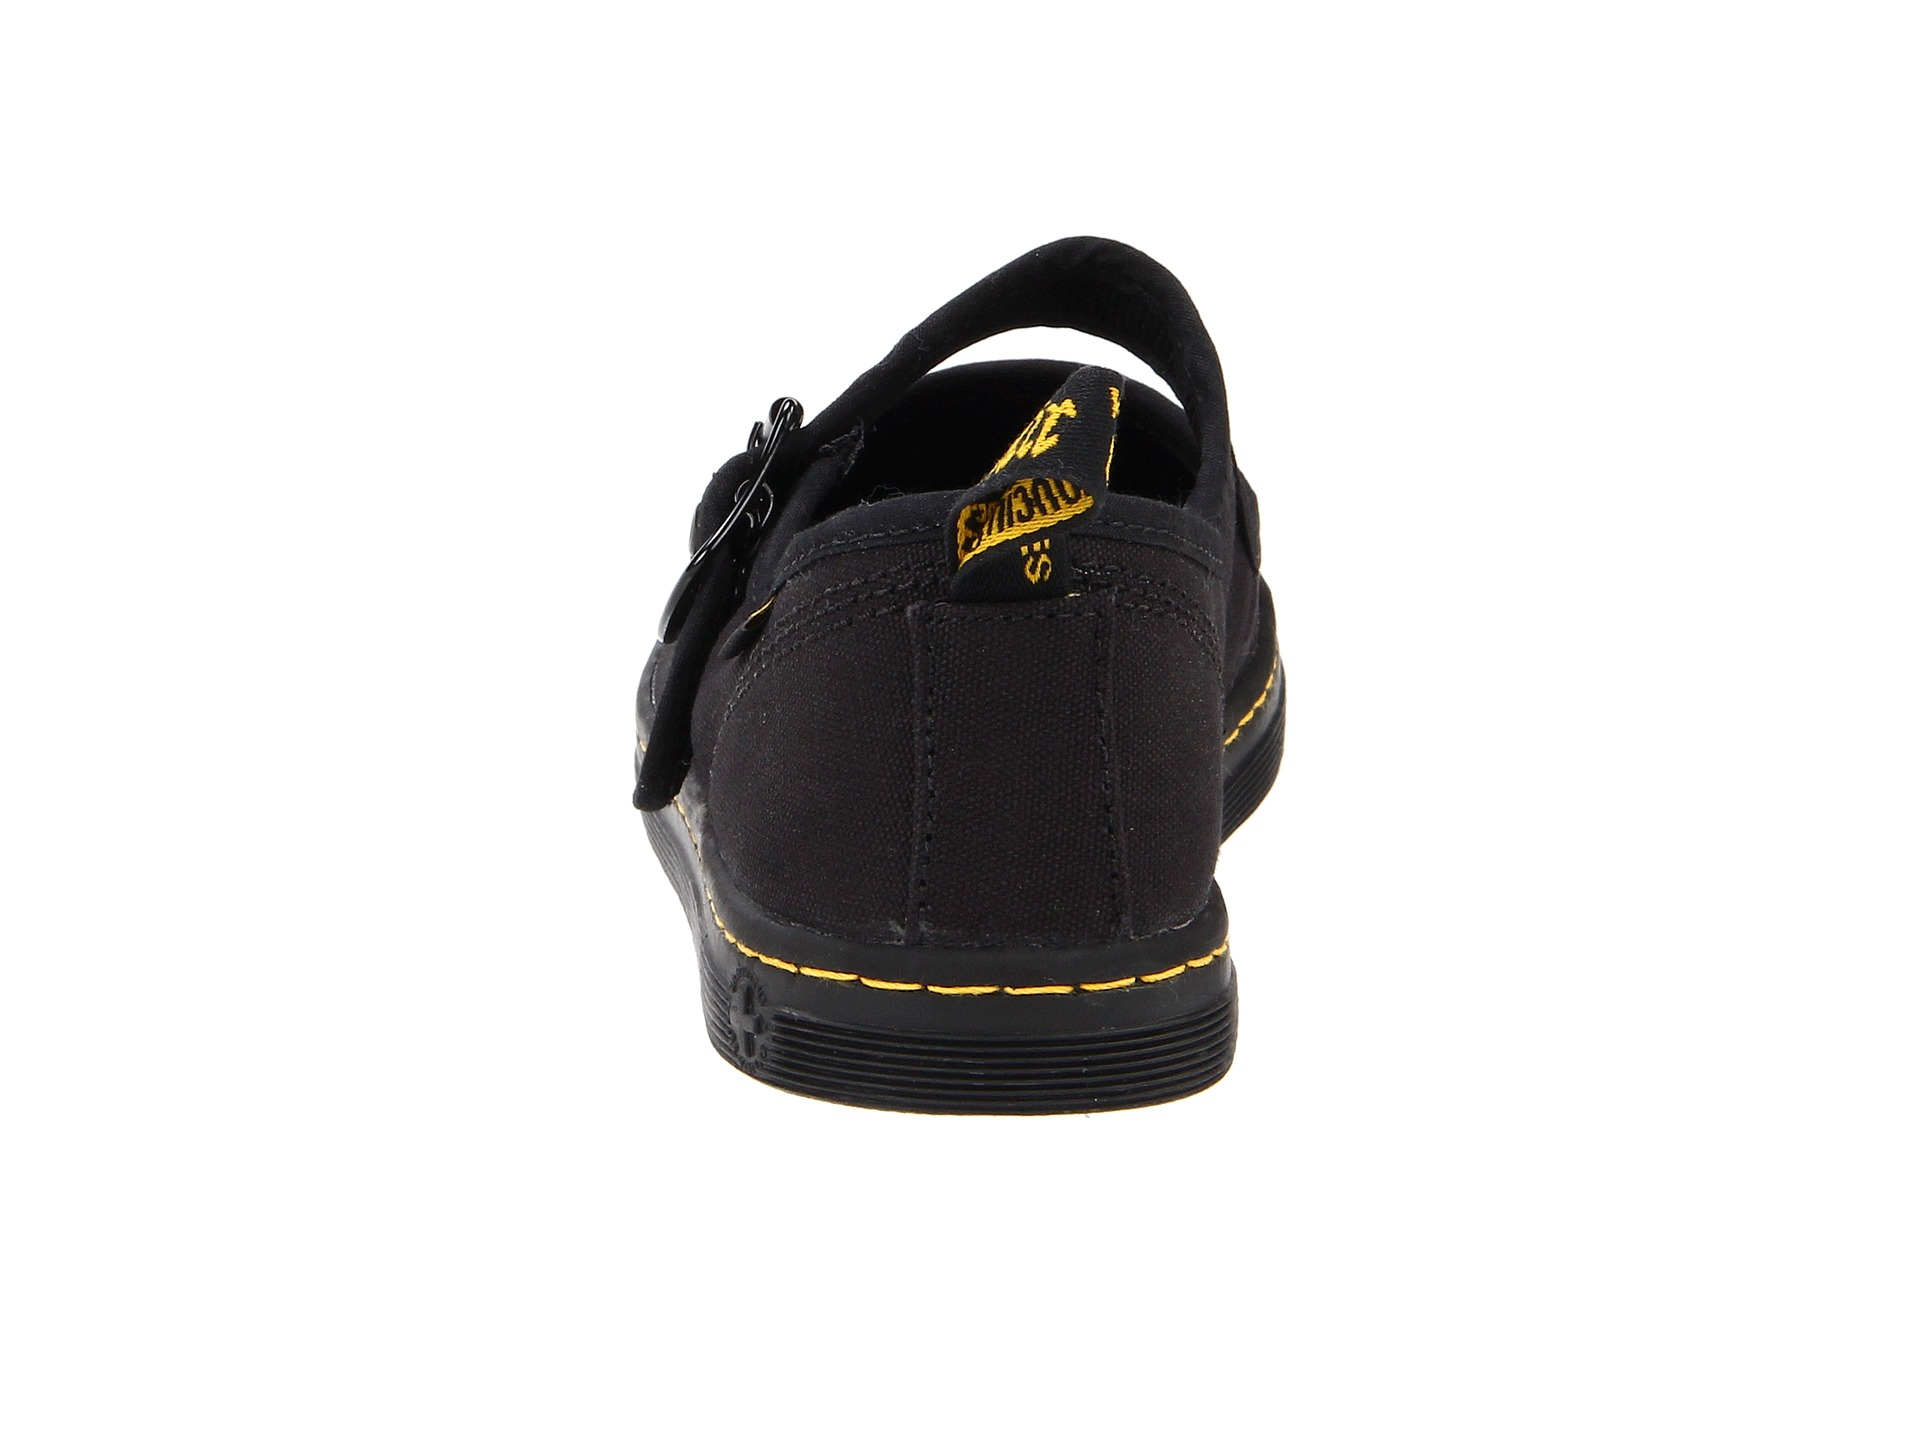 Dr. Martens Carnaby Mary Jane in Black | Lyst